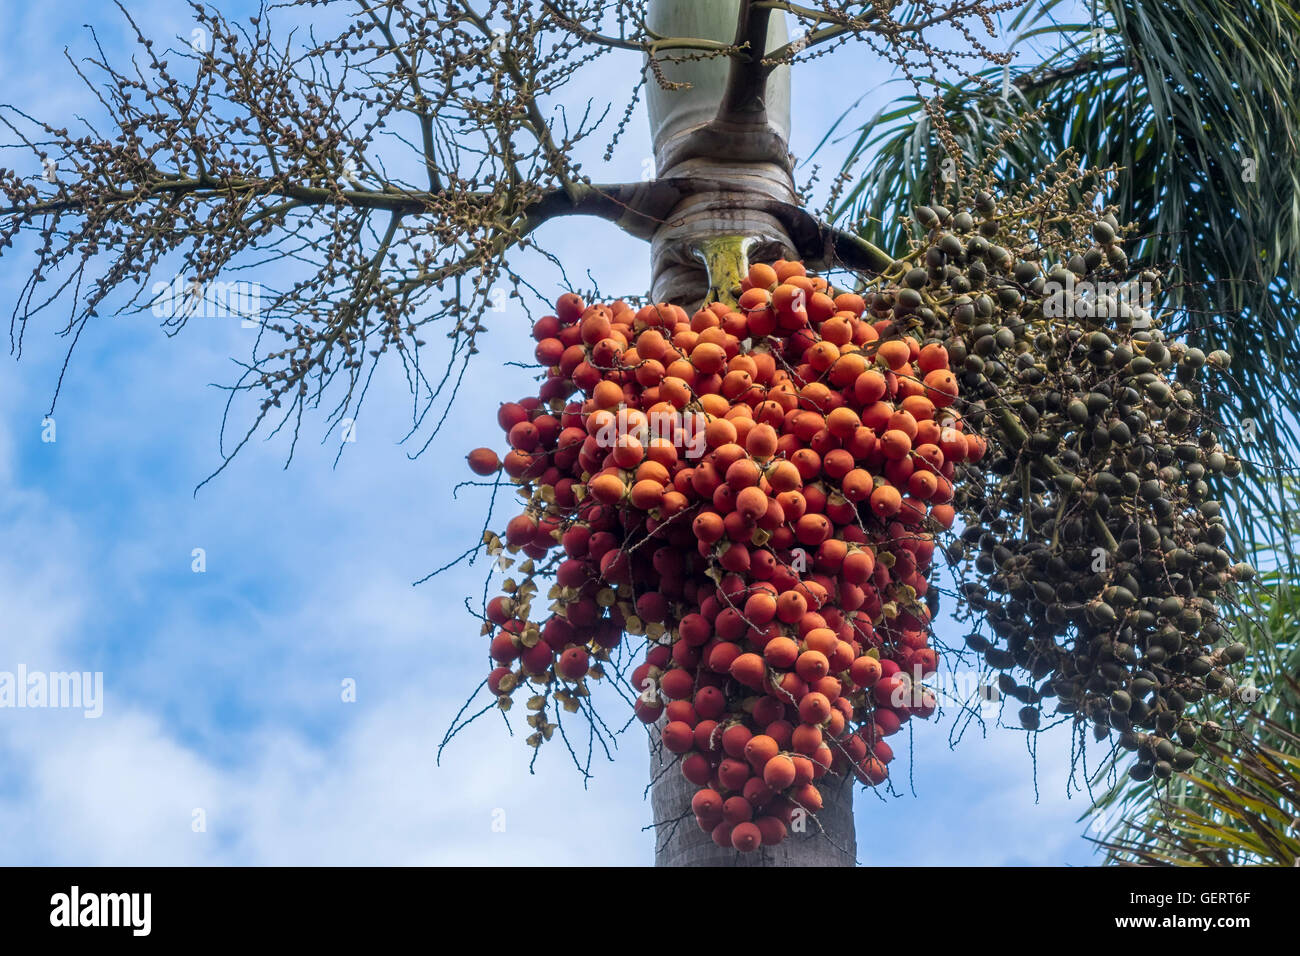 Queen Palm Tree Berries St. Kitts West Indies Stock Photo